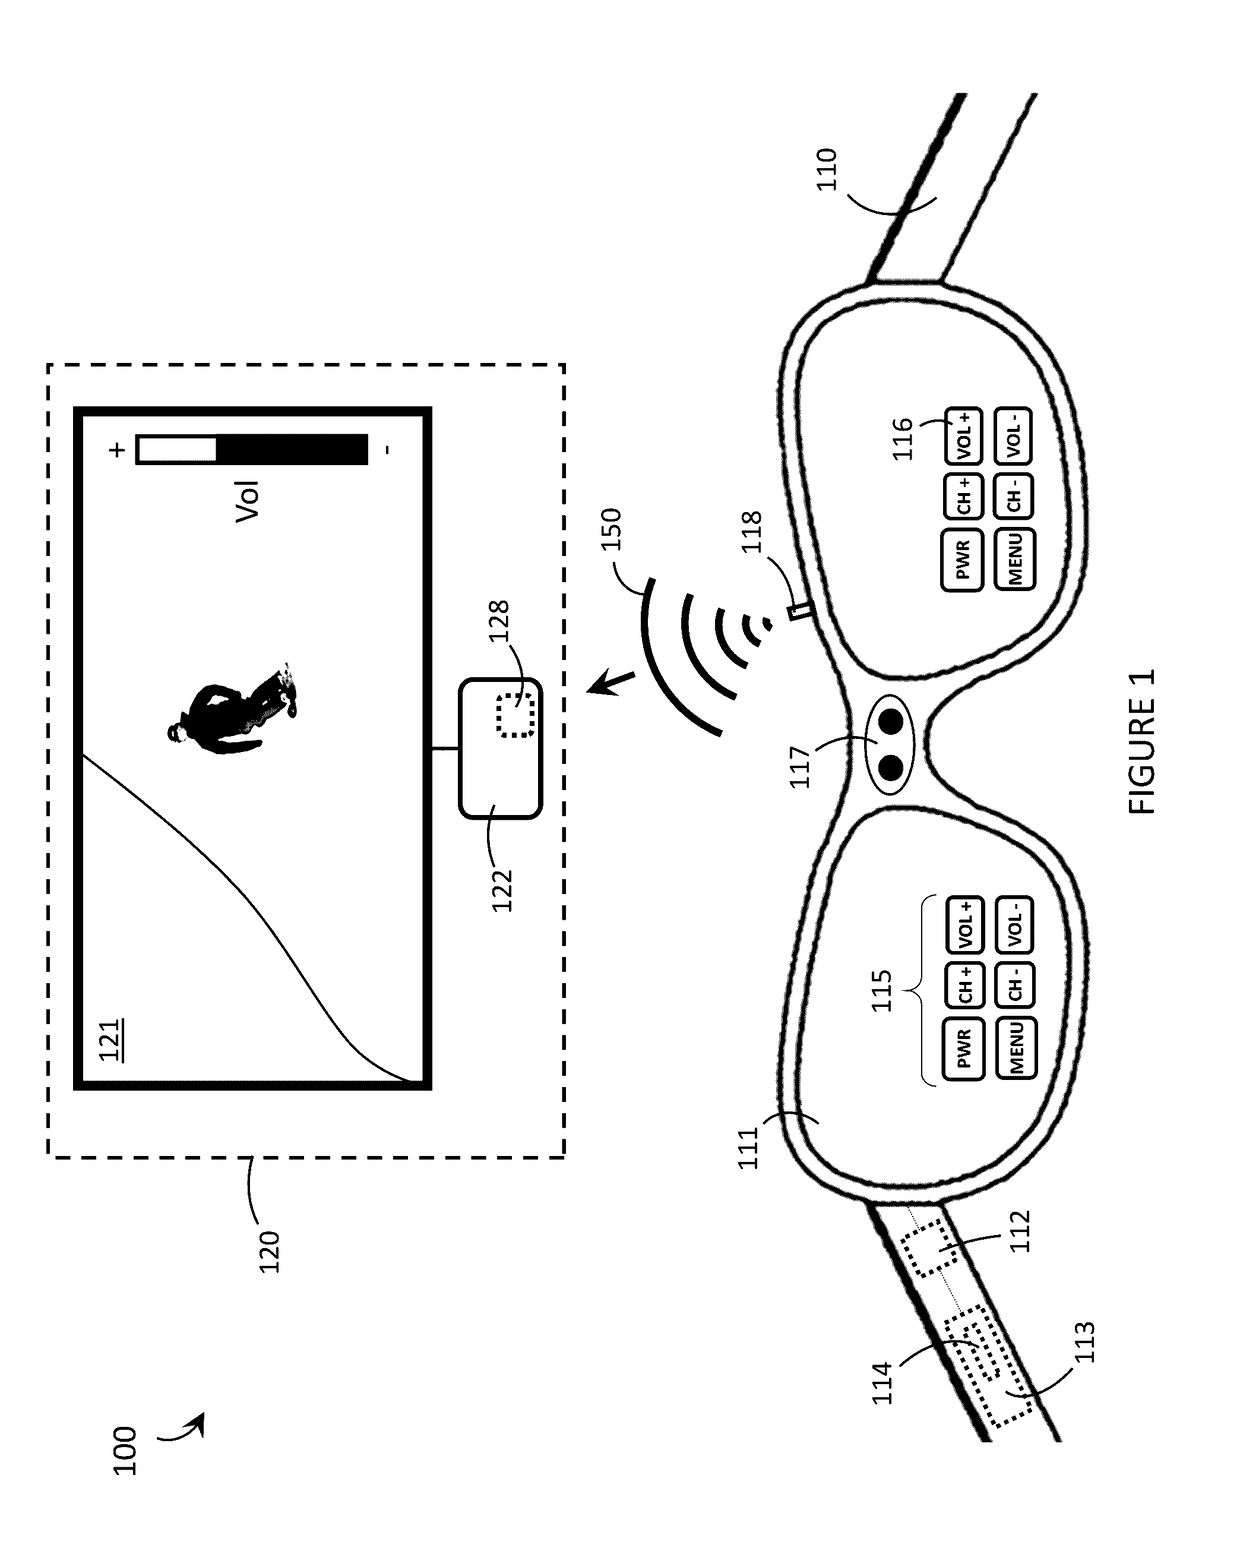 Systems, devices, and methods for wearable heads-up displays as wireless controllers